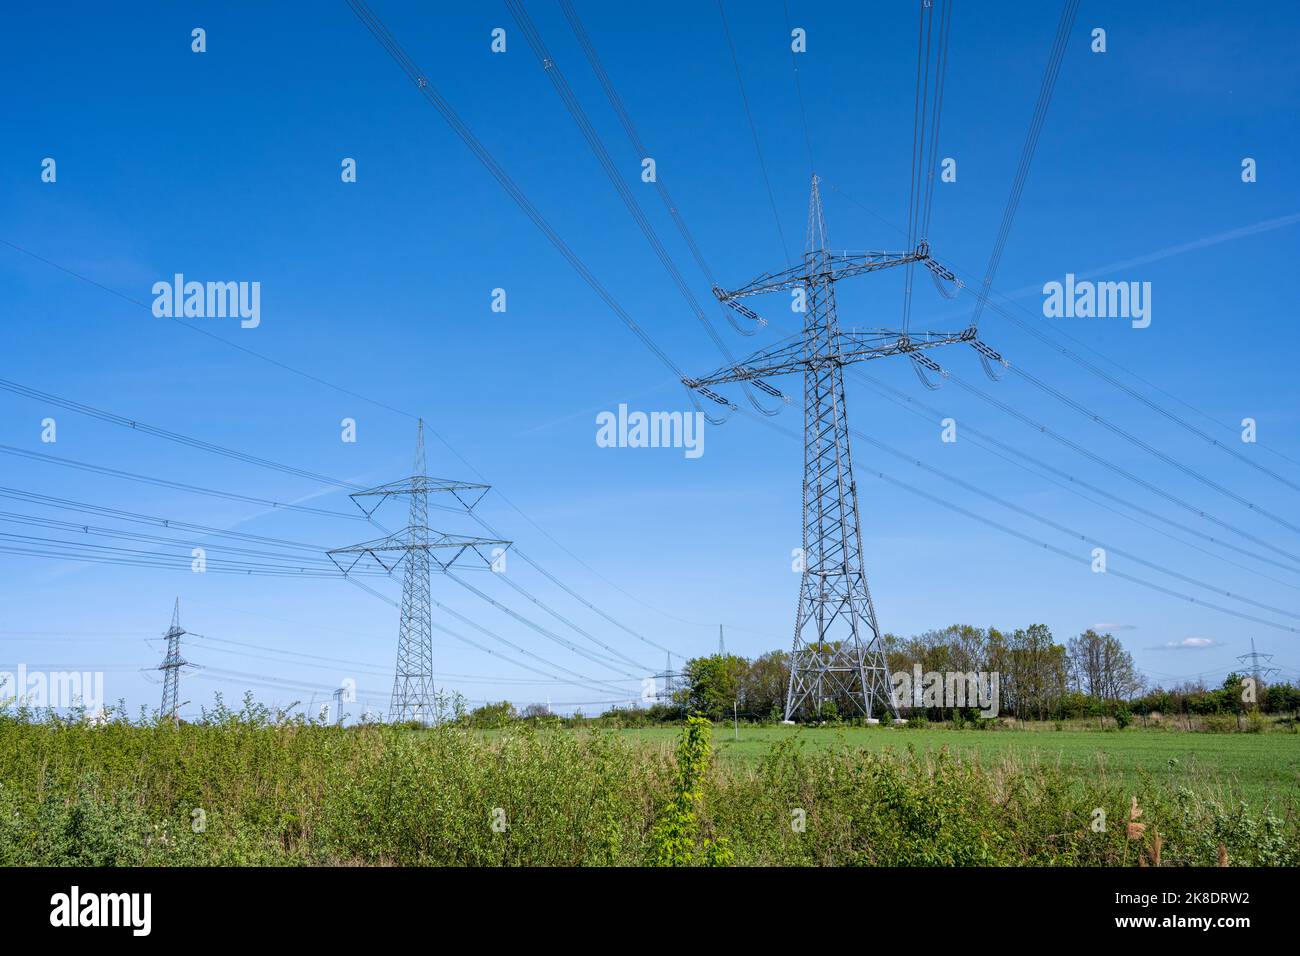 Electricity pylons and power lines in front of a blue sky seen in Germany Stock Photo